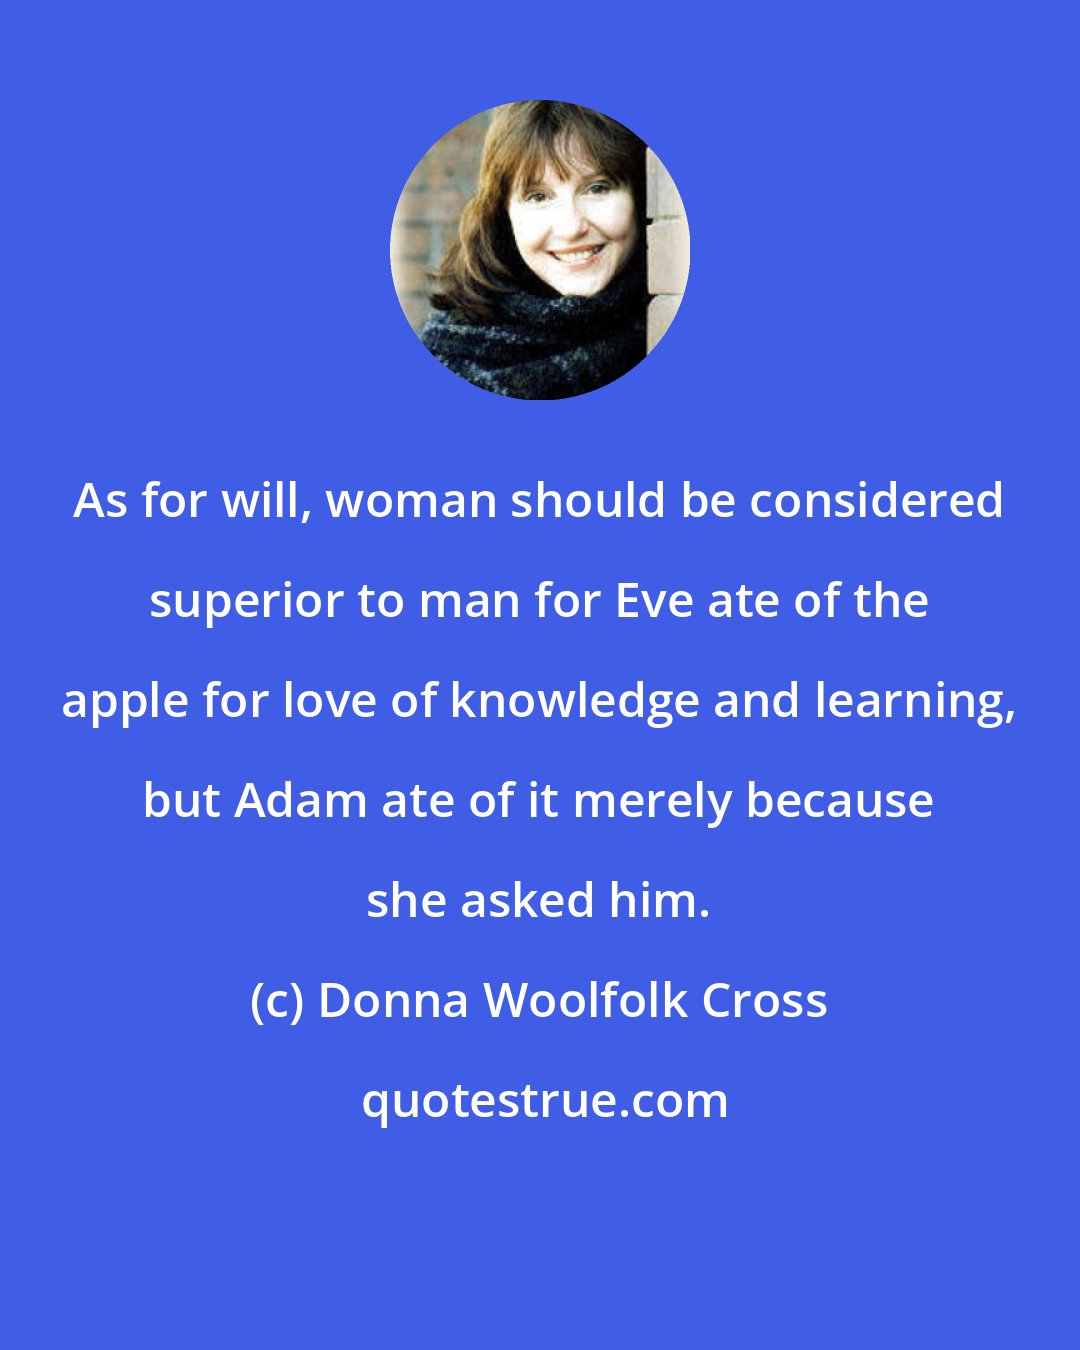 Donna Woolfolk Cross: As for will, woman should be considered superior to man for Eve ate of the apple for love of knowledge and learning, but Adam ate of it merely because she asked him.